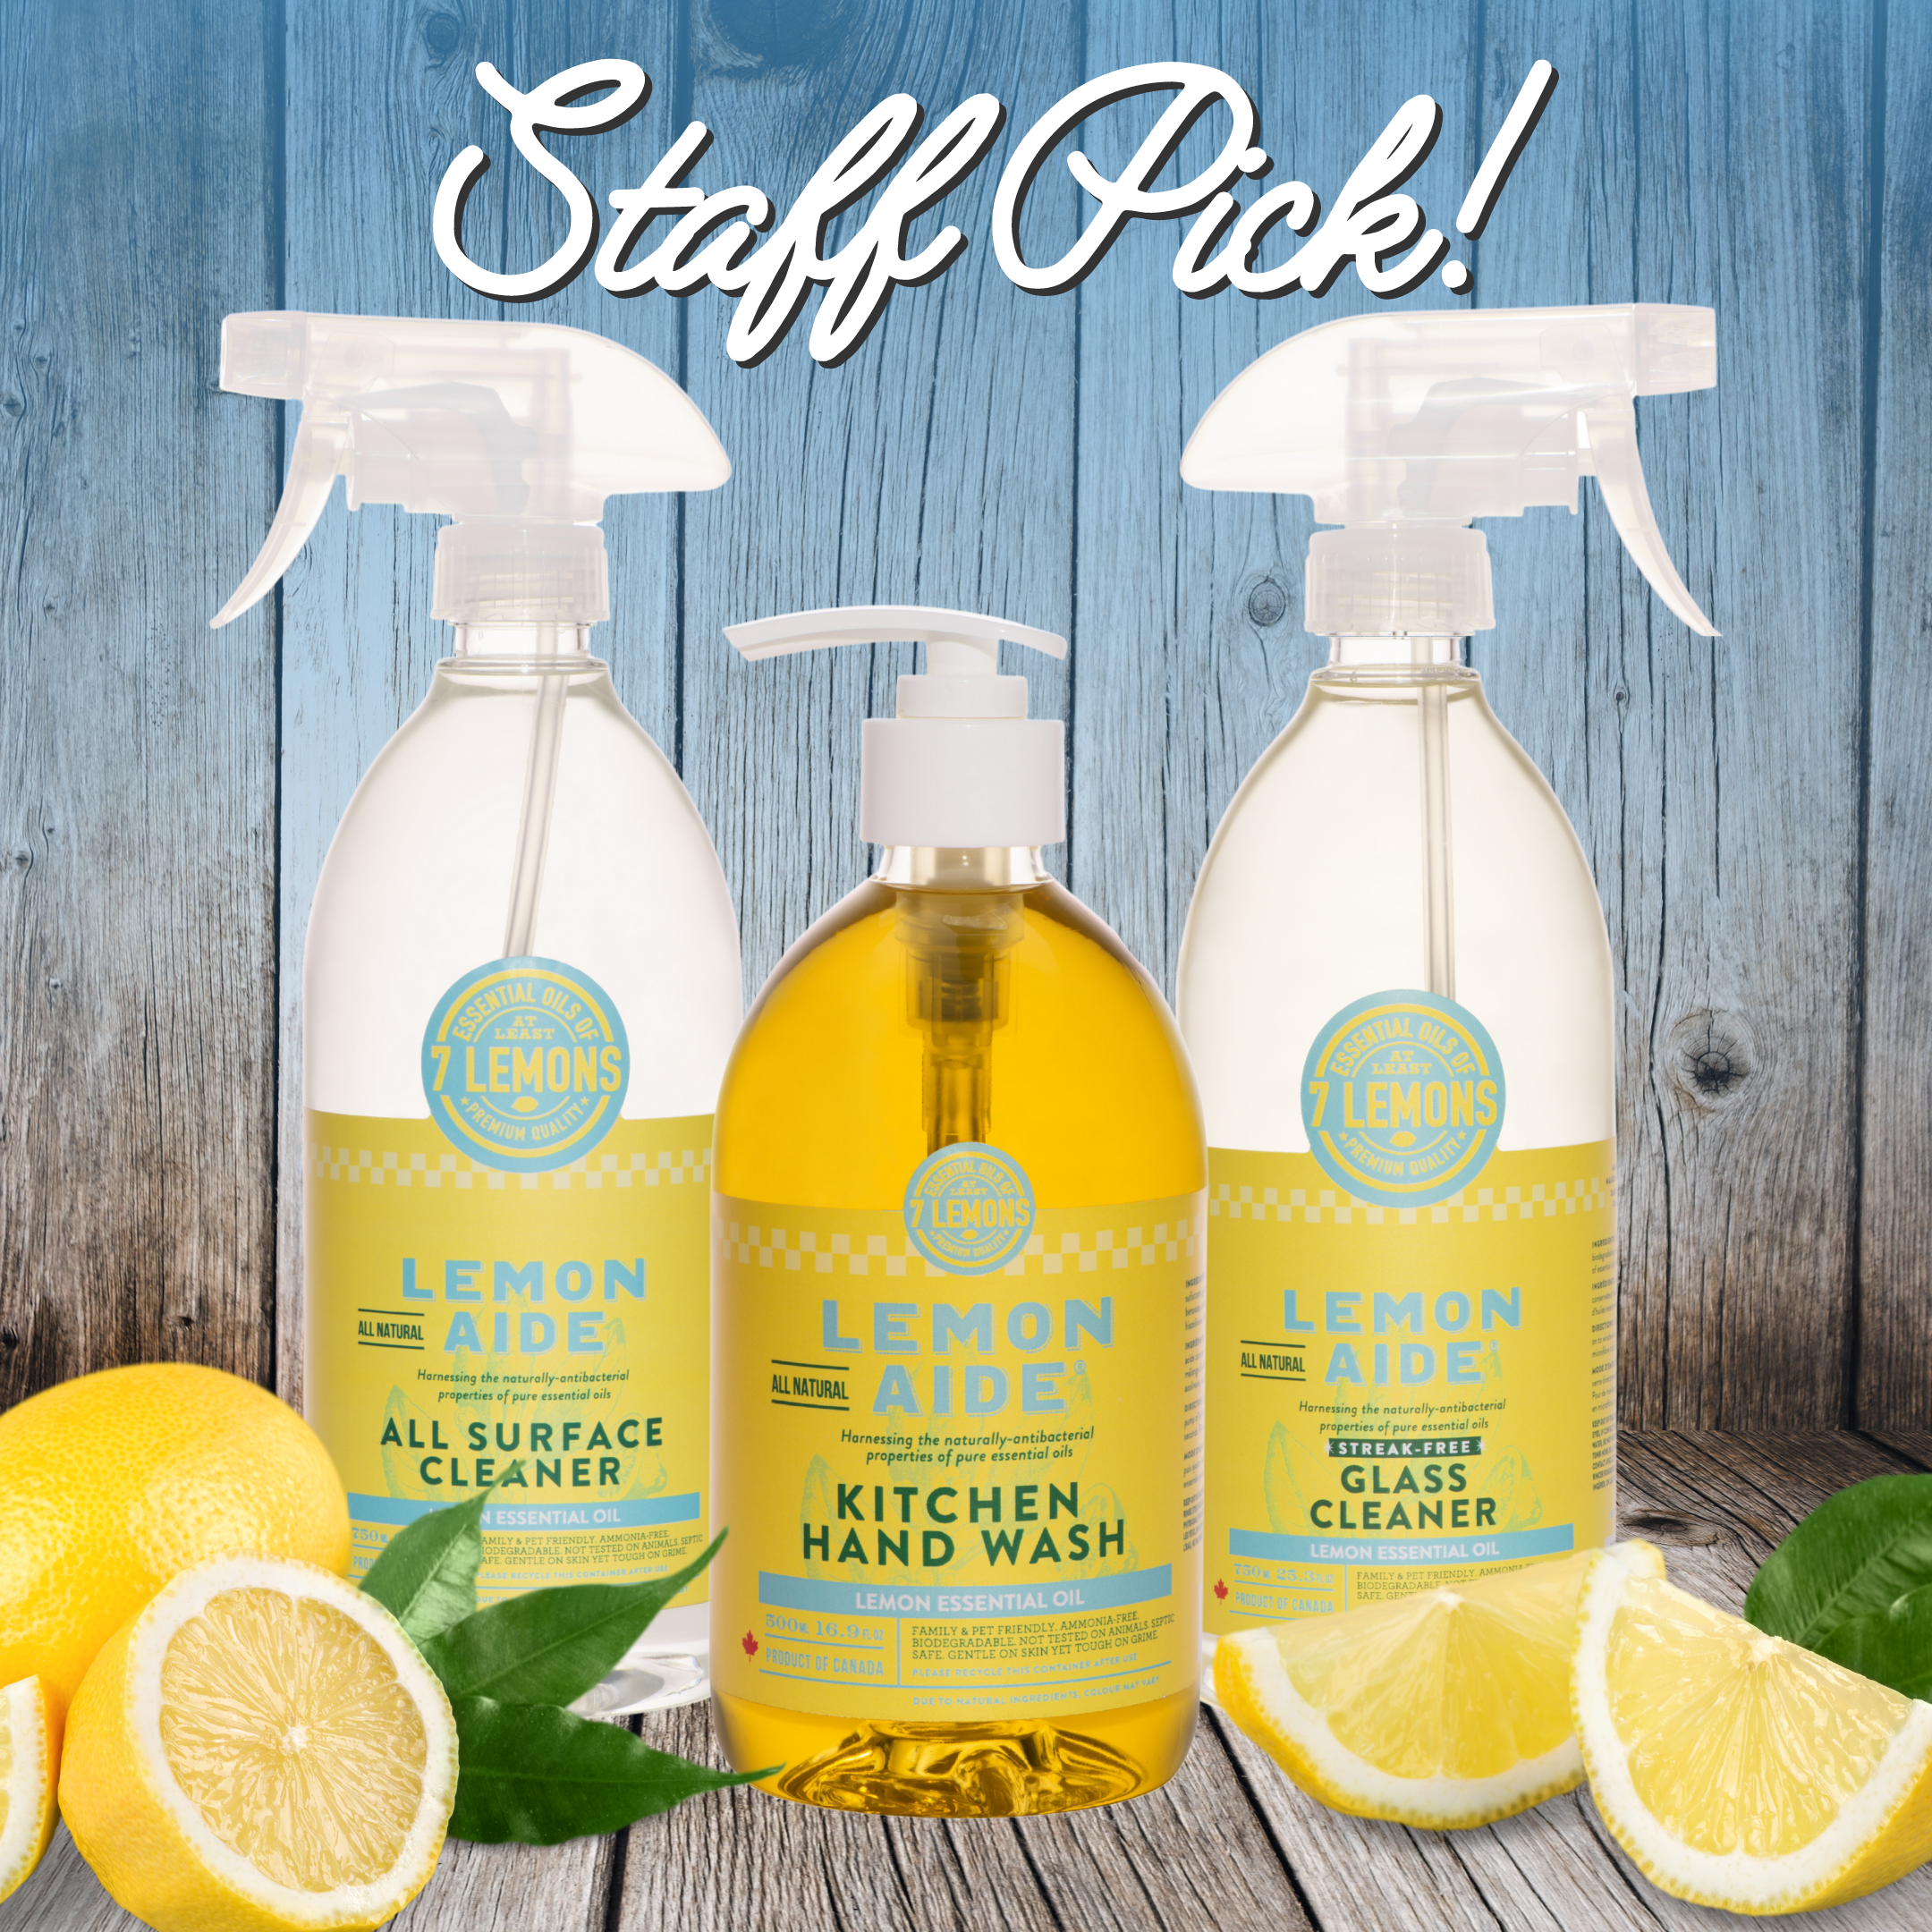 Staff Pick! - Lemon Aide Natural Cleaning Products